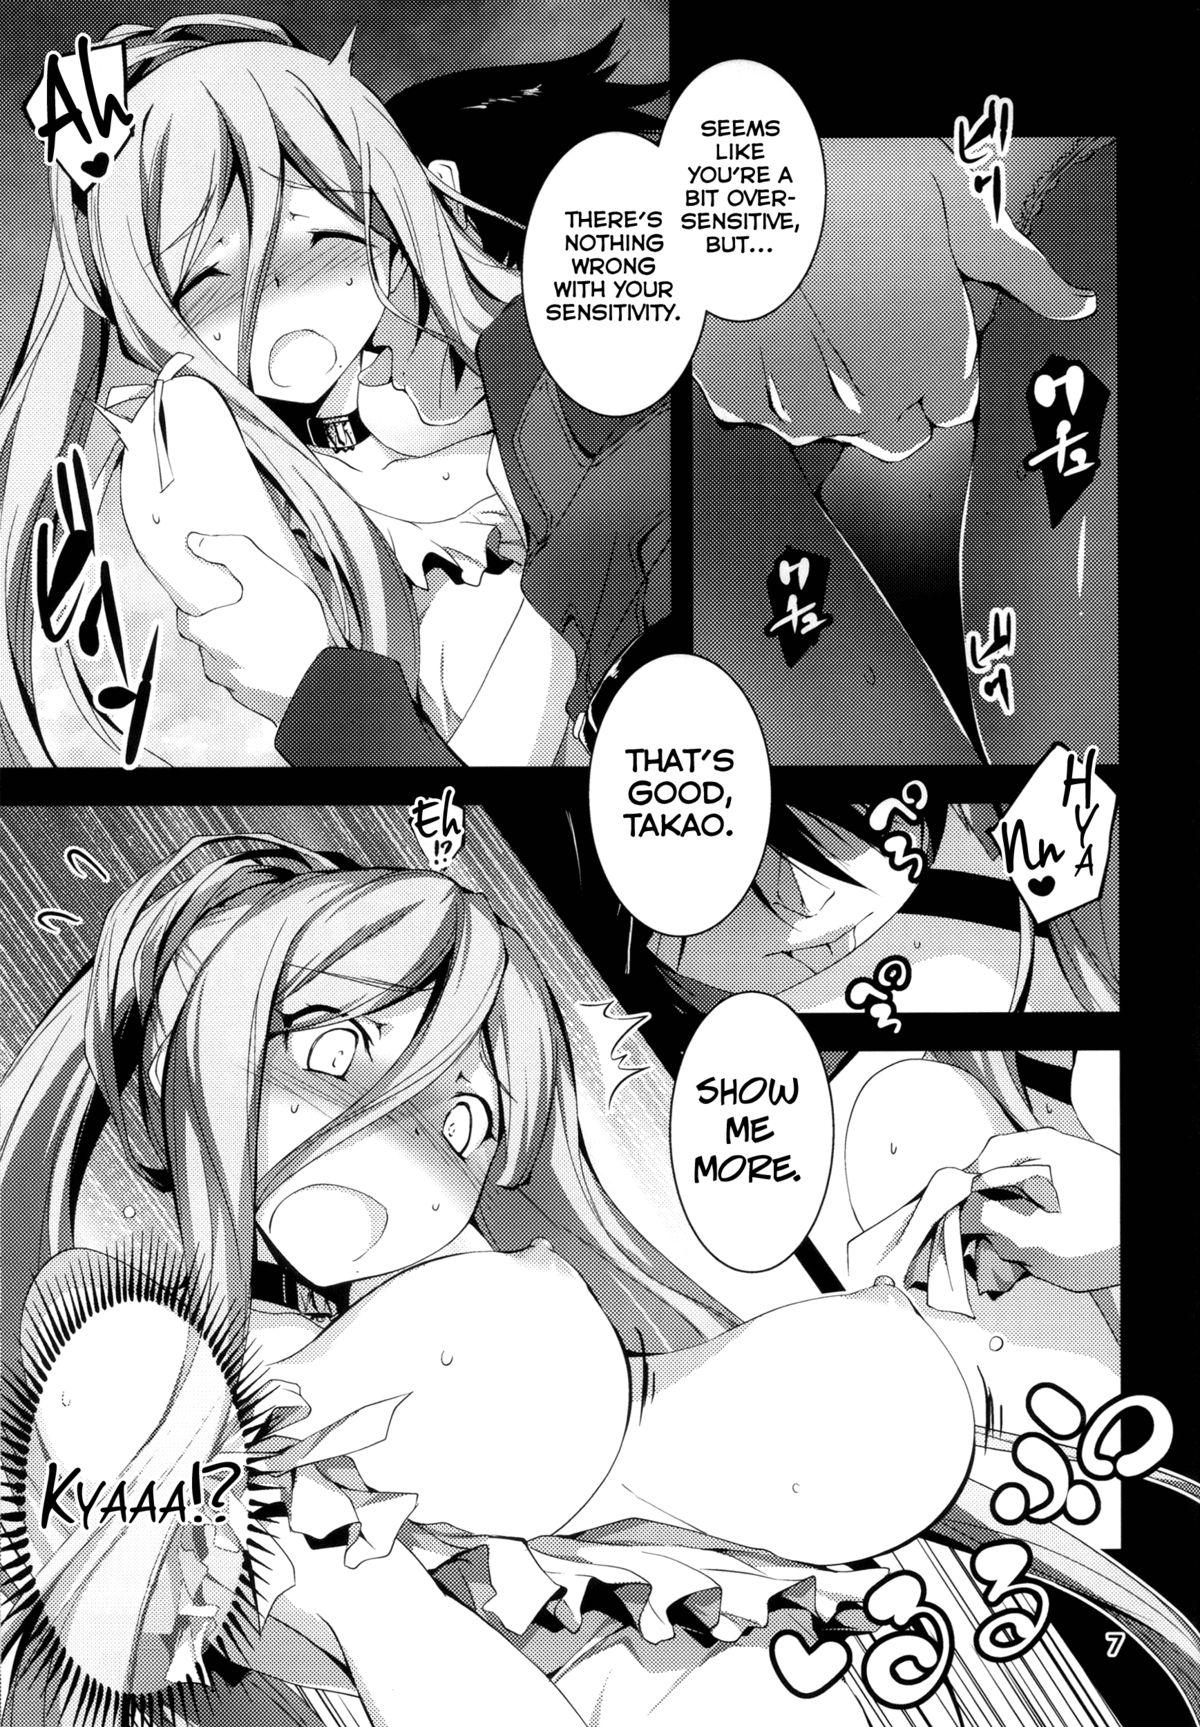 Speculum Takao Plug In! - Arpeggio of blue steel Nasty Porn - Page 8